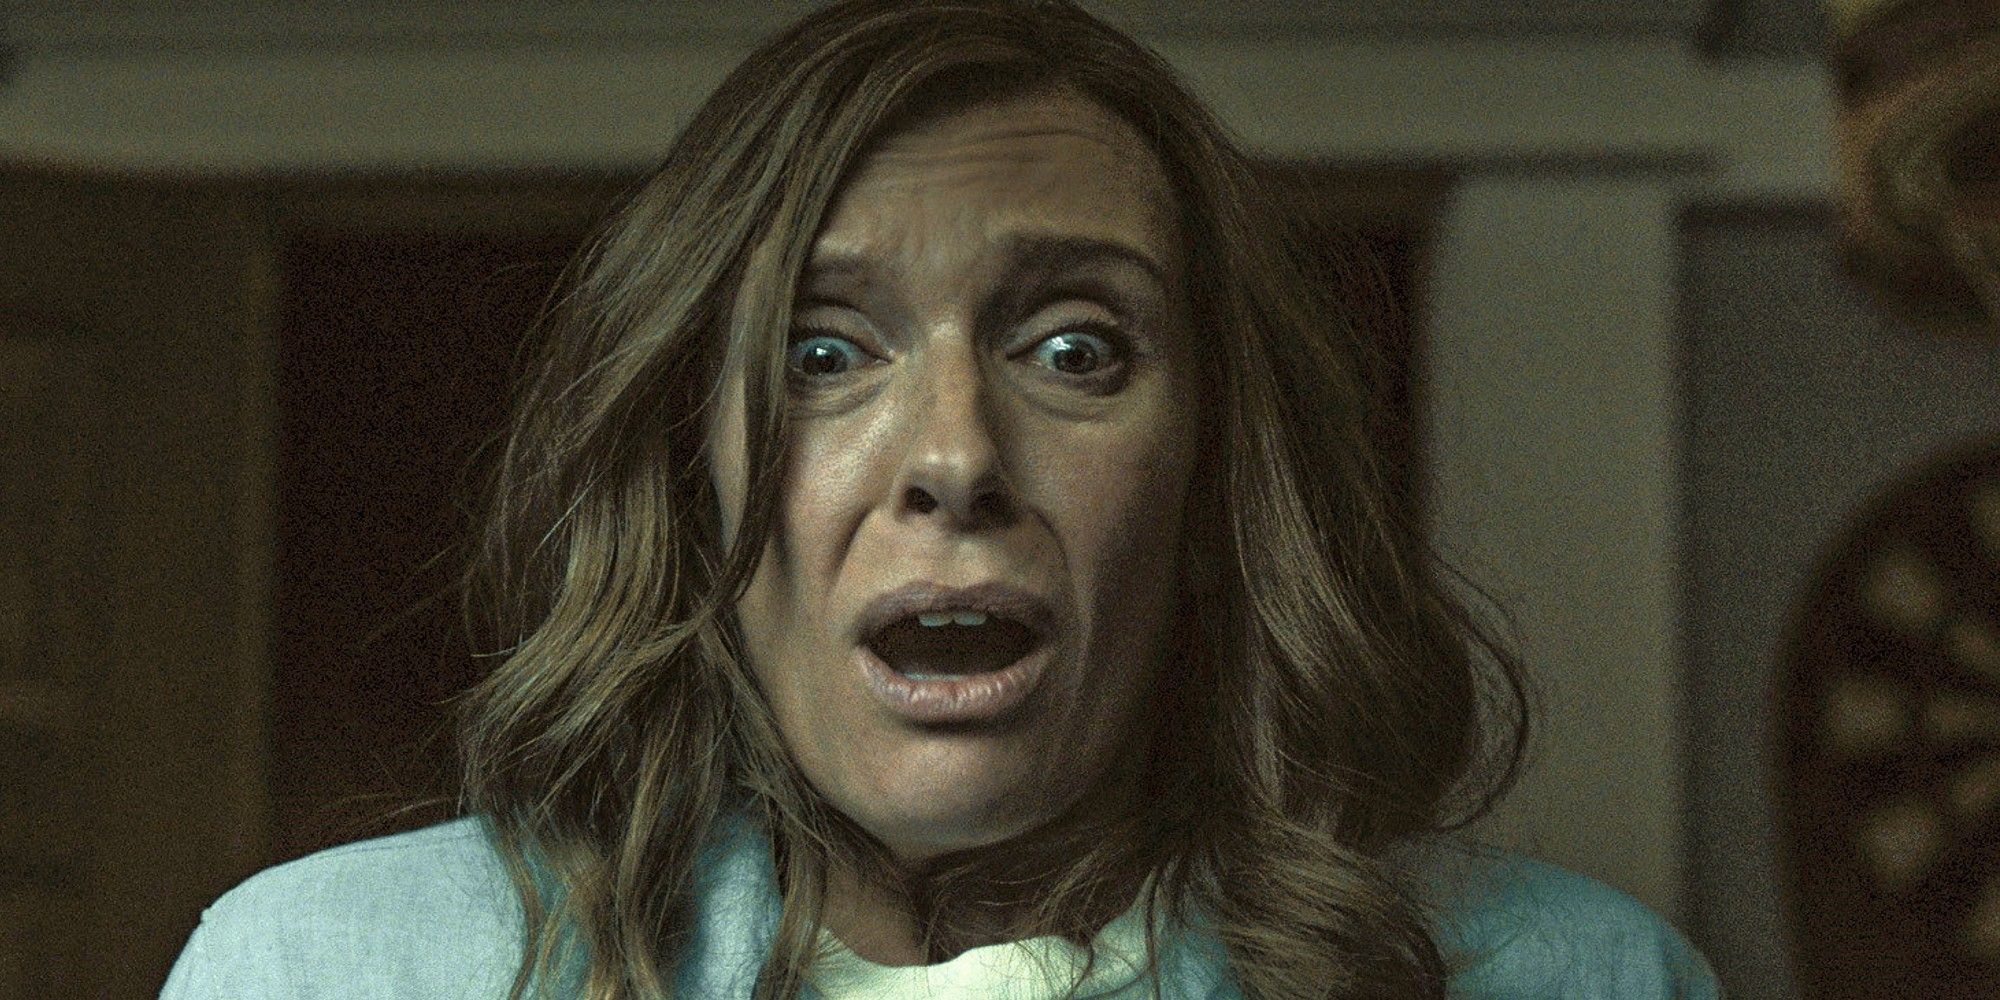 Toni Collette in 'The Hereditary'